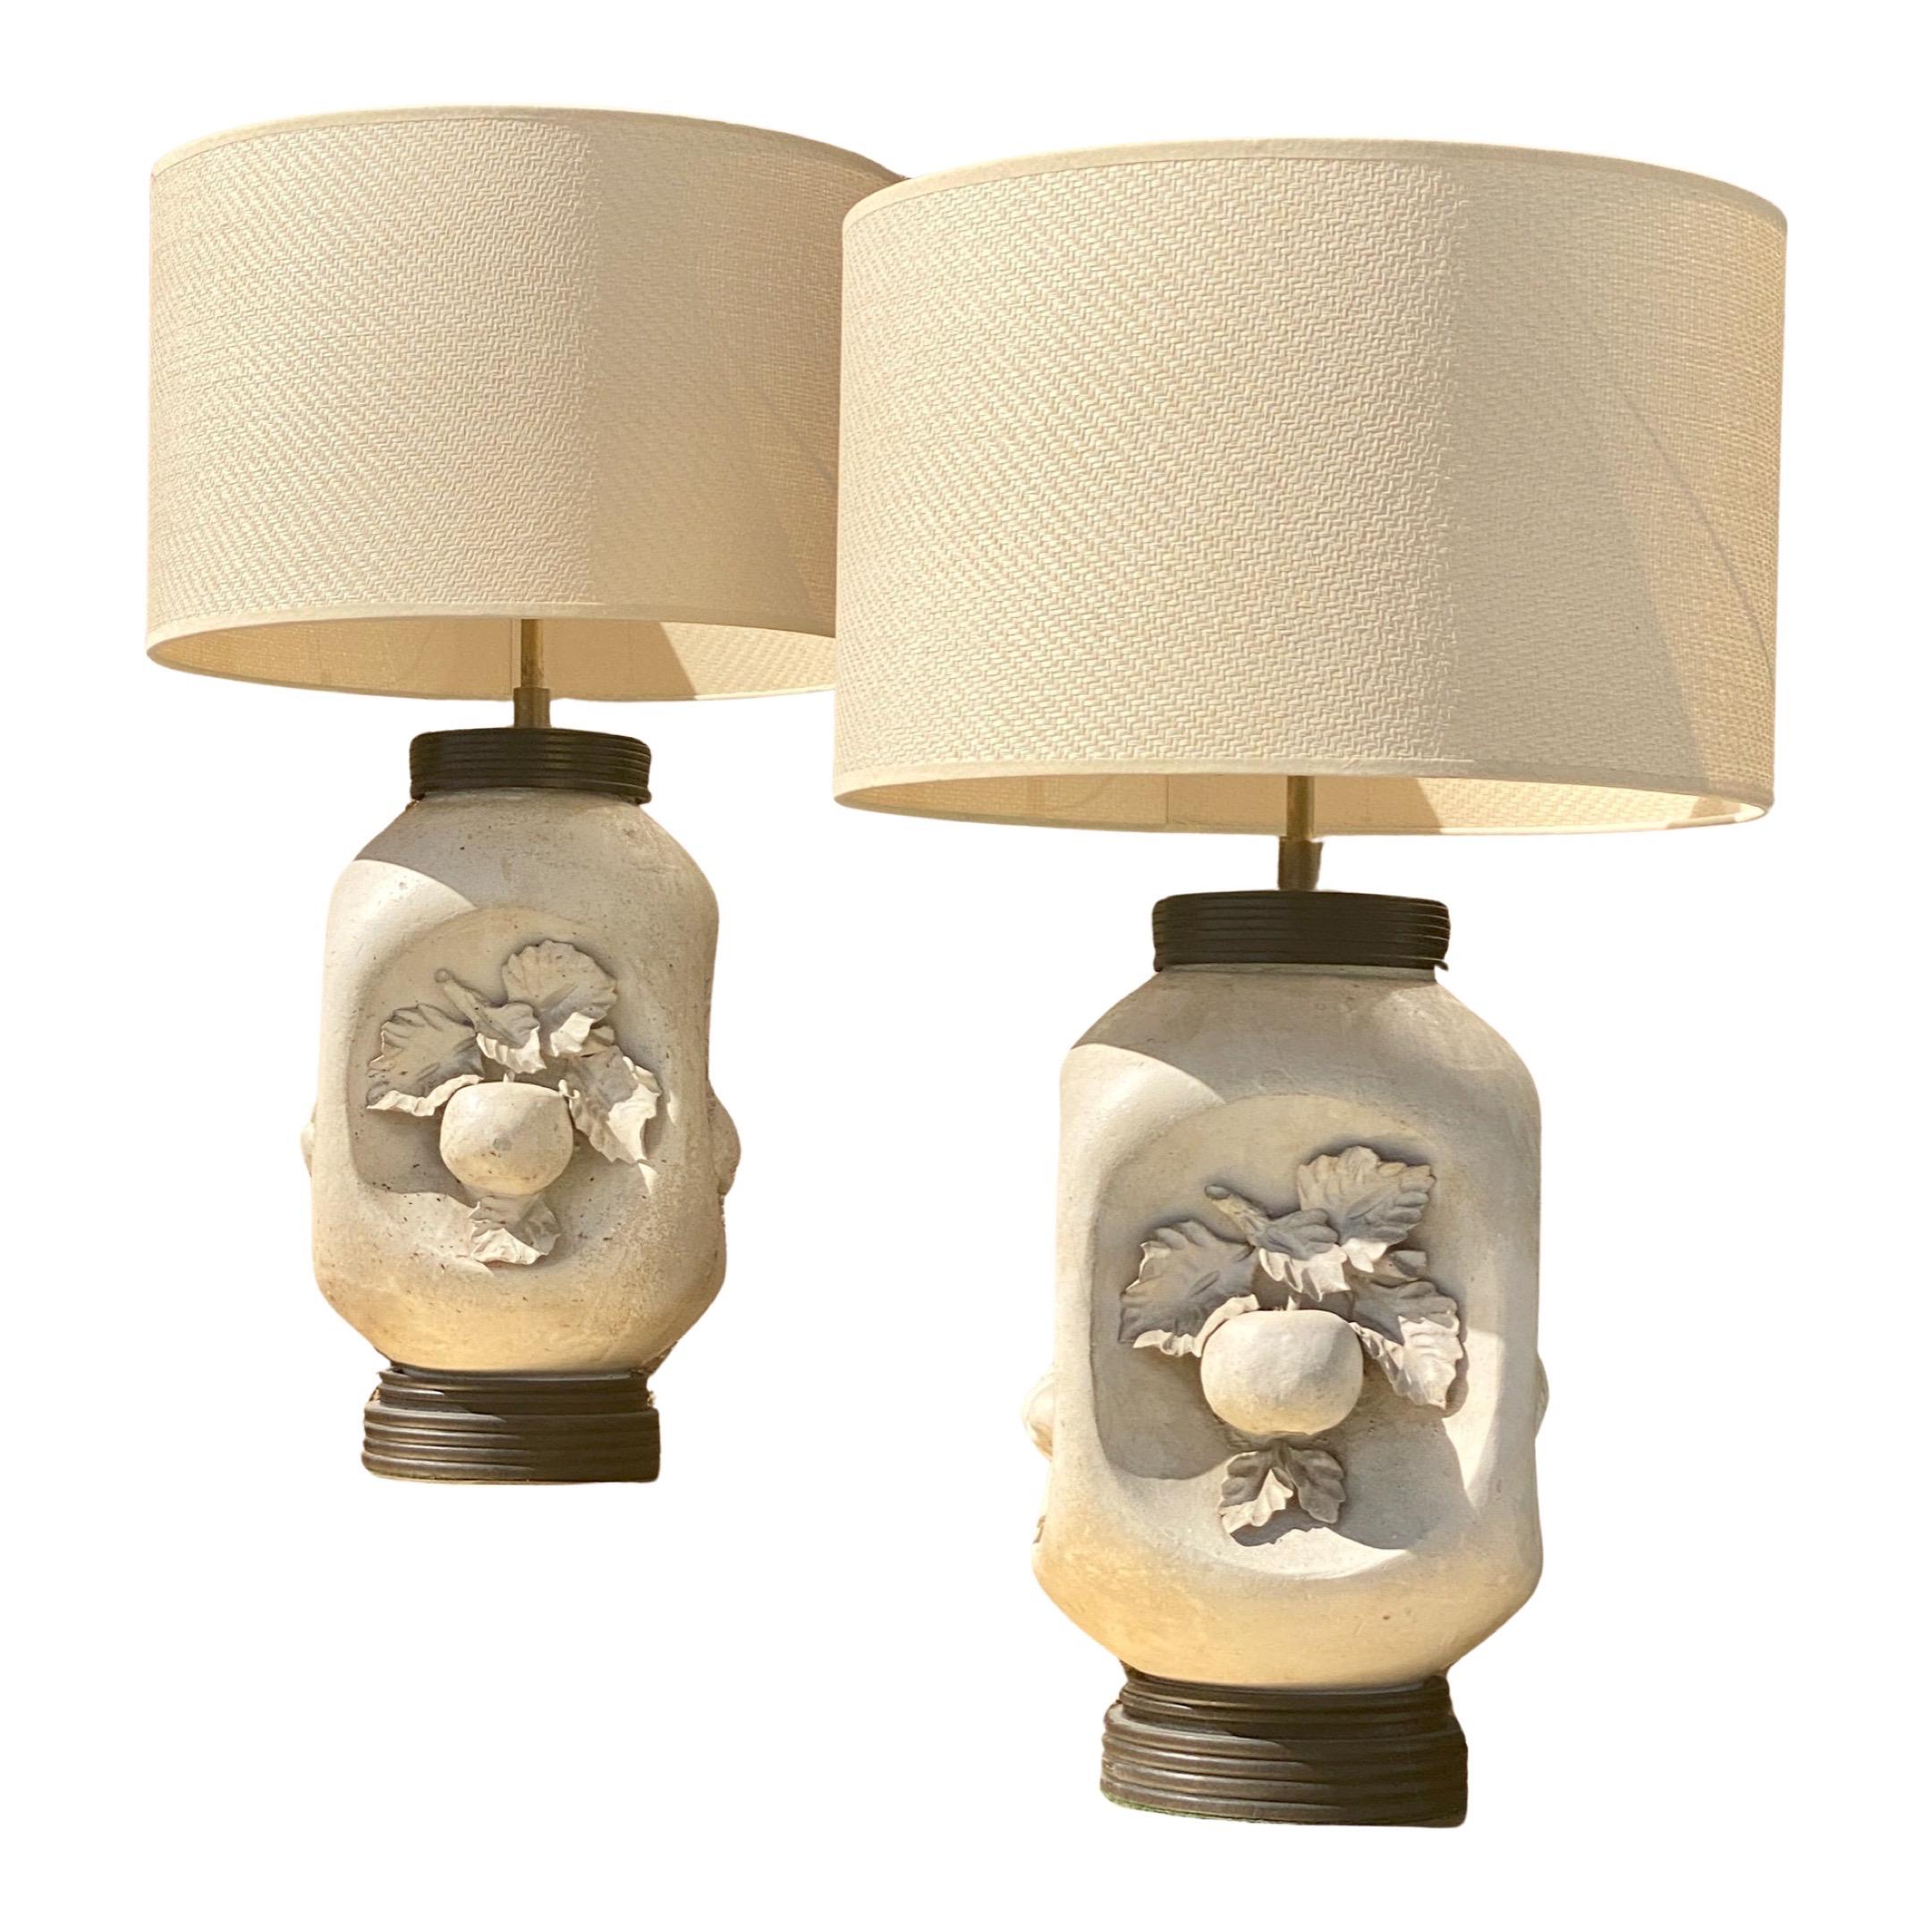 A really beautiful and rare pair of high end Mid-Century Modern lamps made in Italy in the 1950s. Matte bisque natural white color with black bases. Newly rewired with new cords and high end bronze color double sockets. Each lamp has four sides with